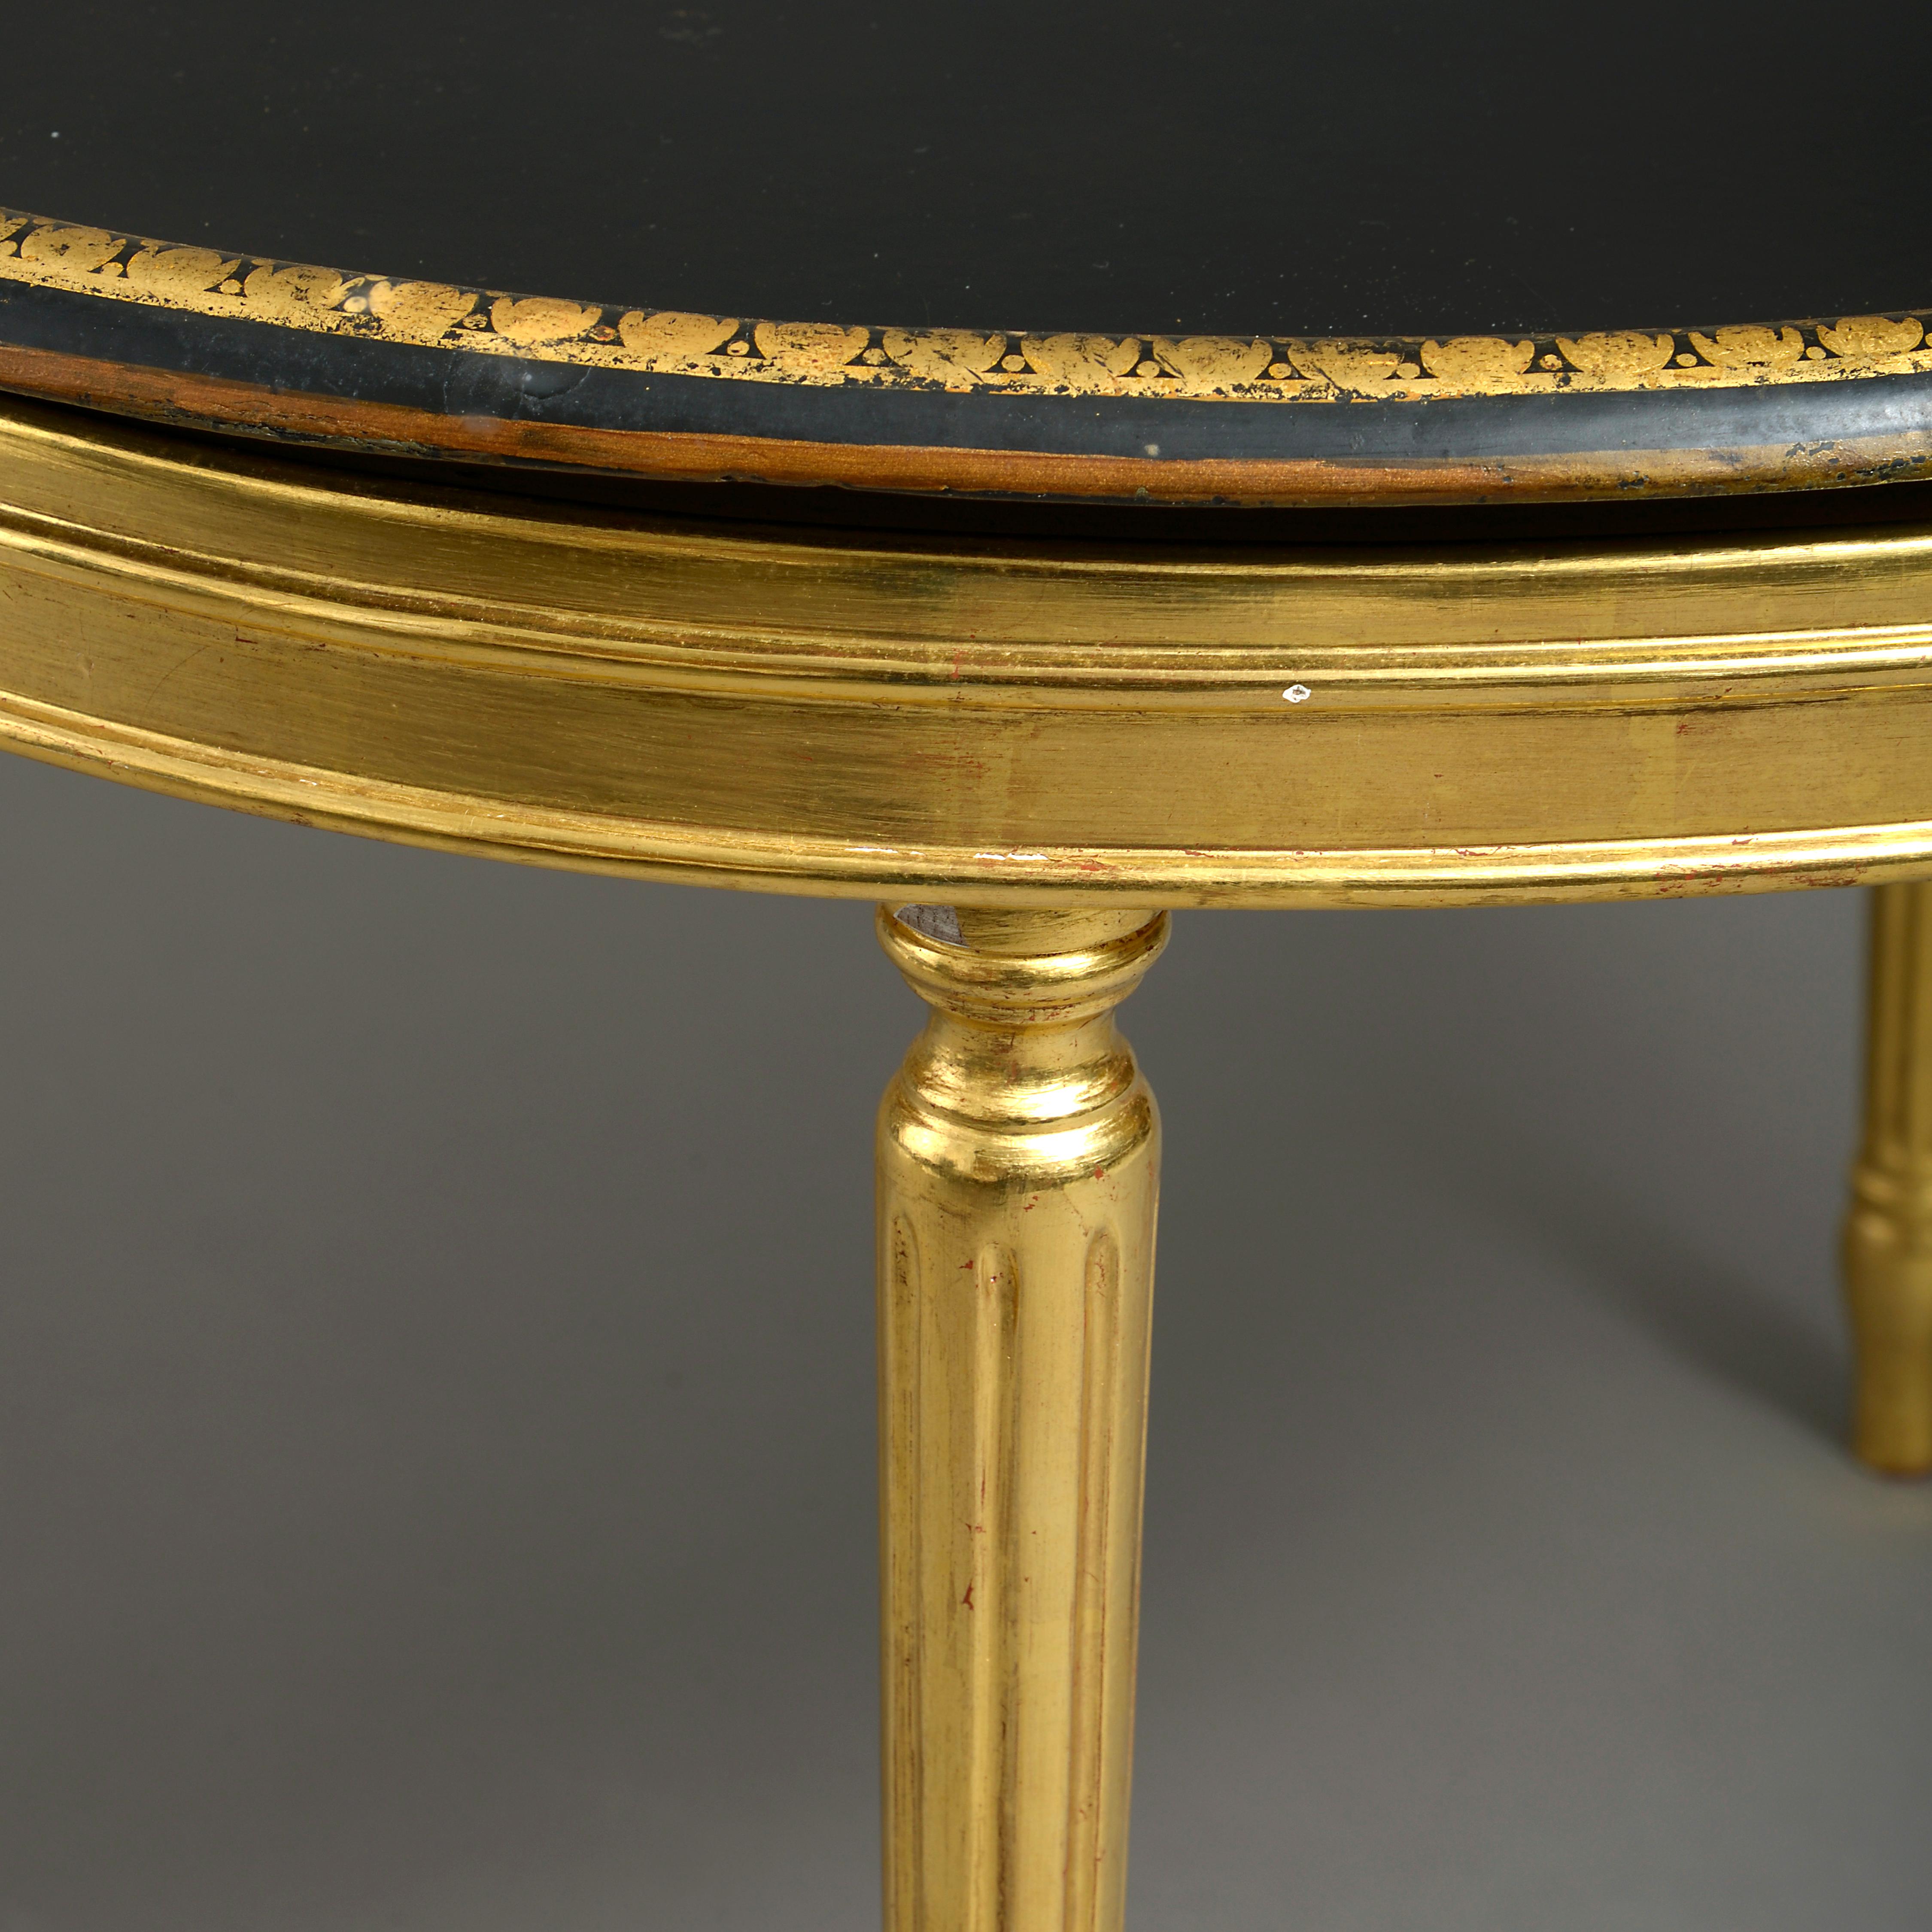 Lacquered Early 19th Century Regency Period Papier Mâché Tray Table